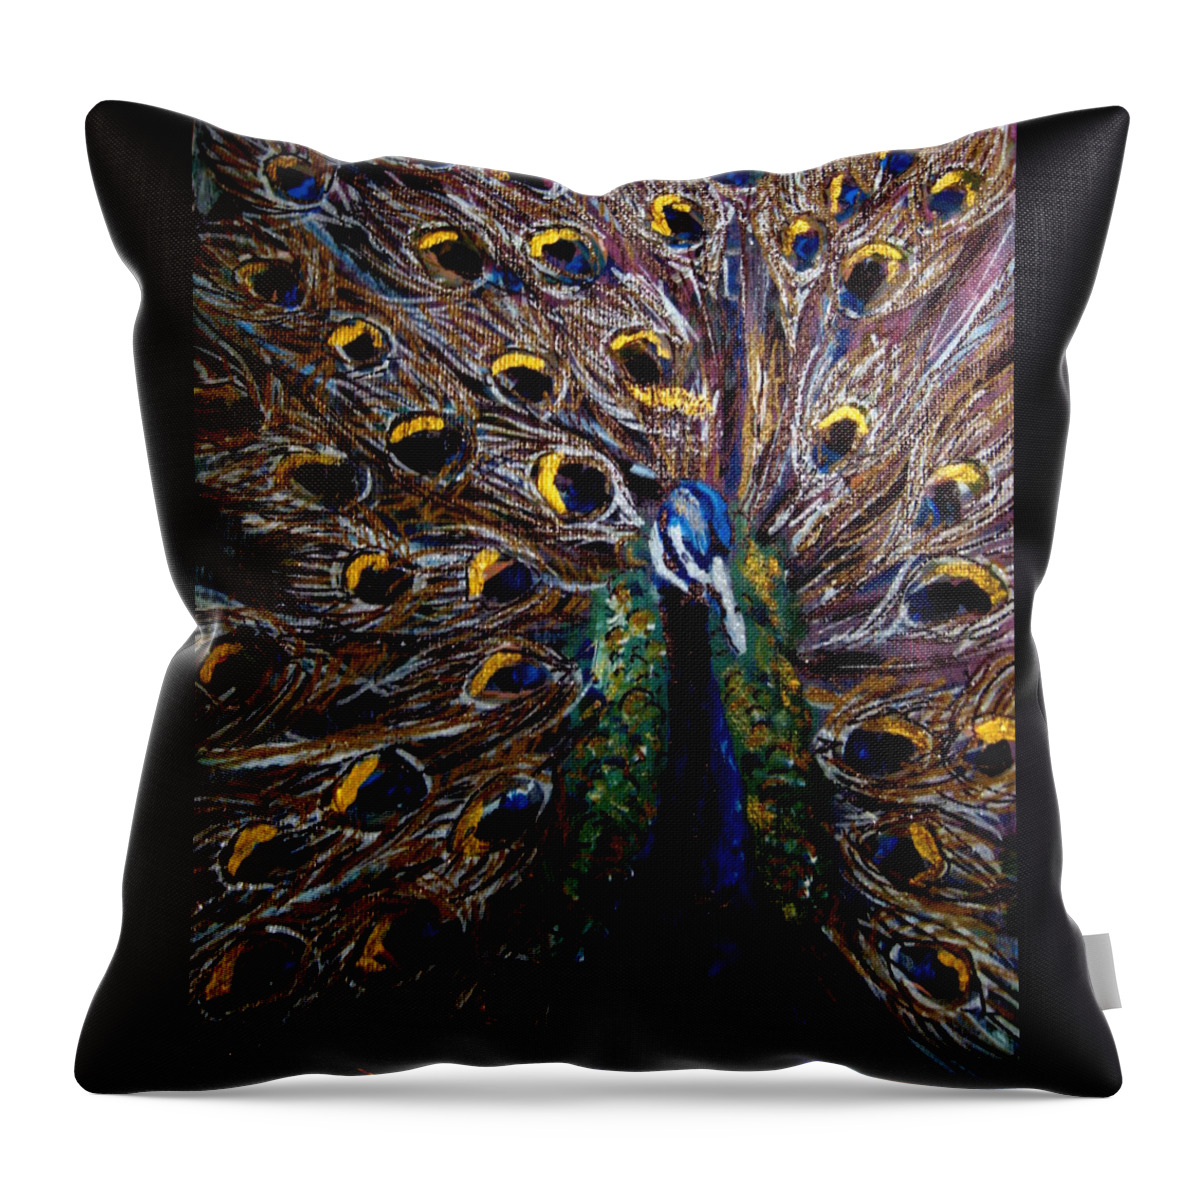 Peacock Throw Pillow featuring the painting Peacock 1 by Amanda Dinan